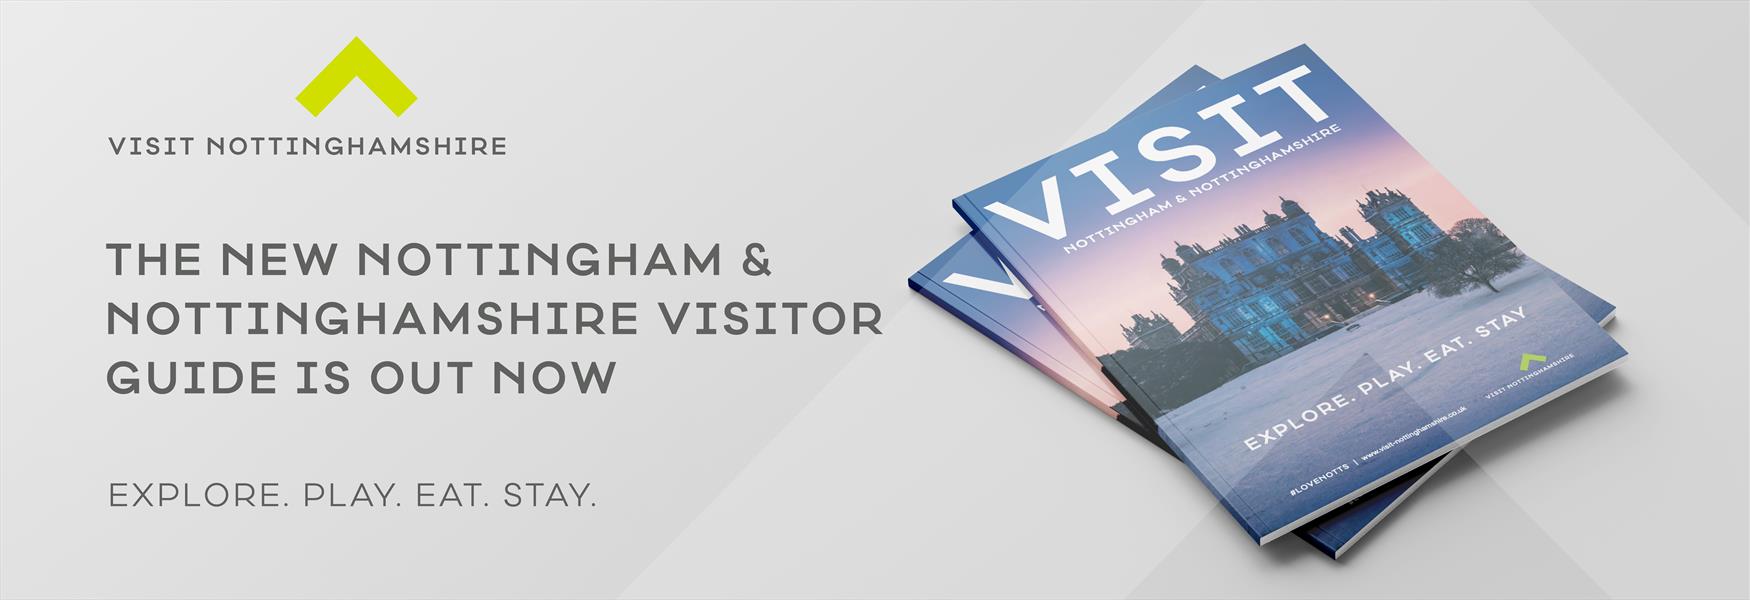 Welcome to the Visitor Guide for Nottingham and Nottinghamshire, filled with inspiration for things to do and see, places to stay, eat, and drink, and much more!